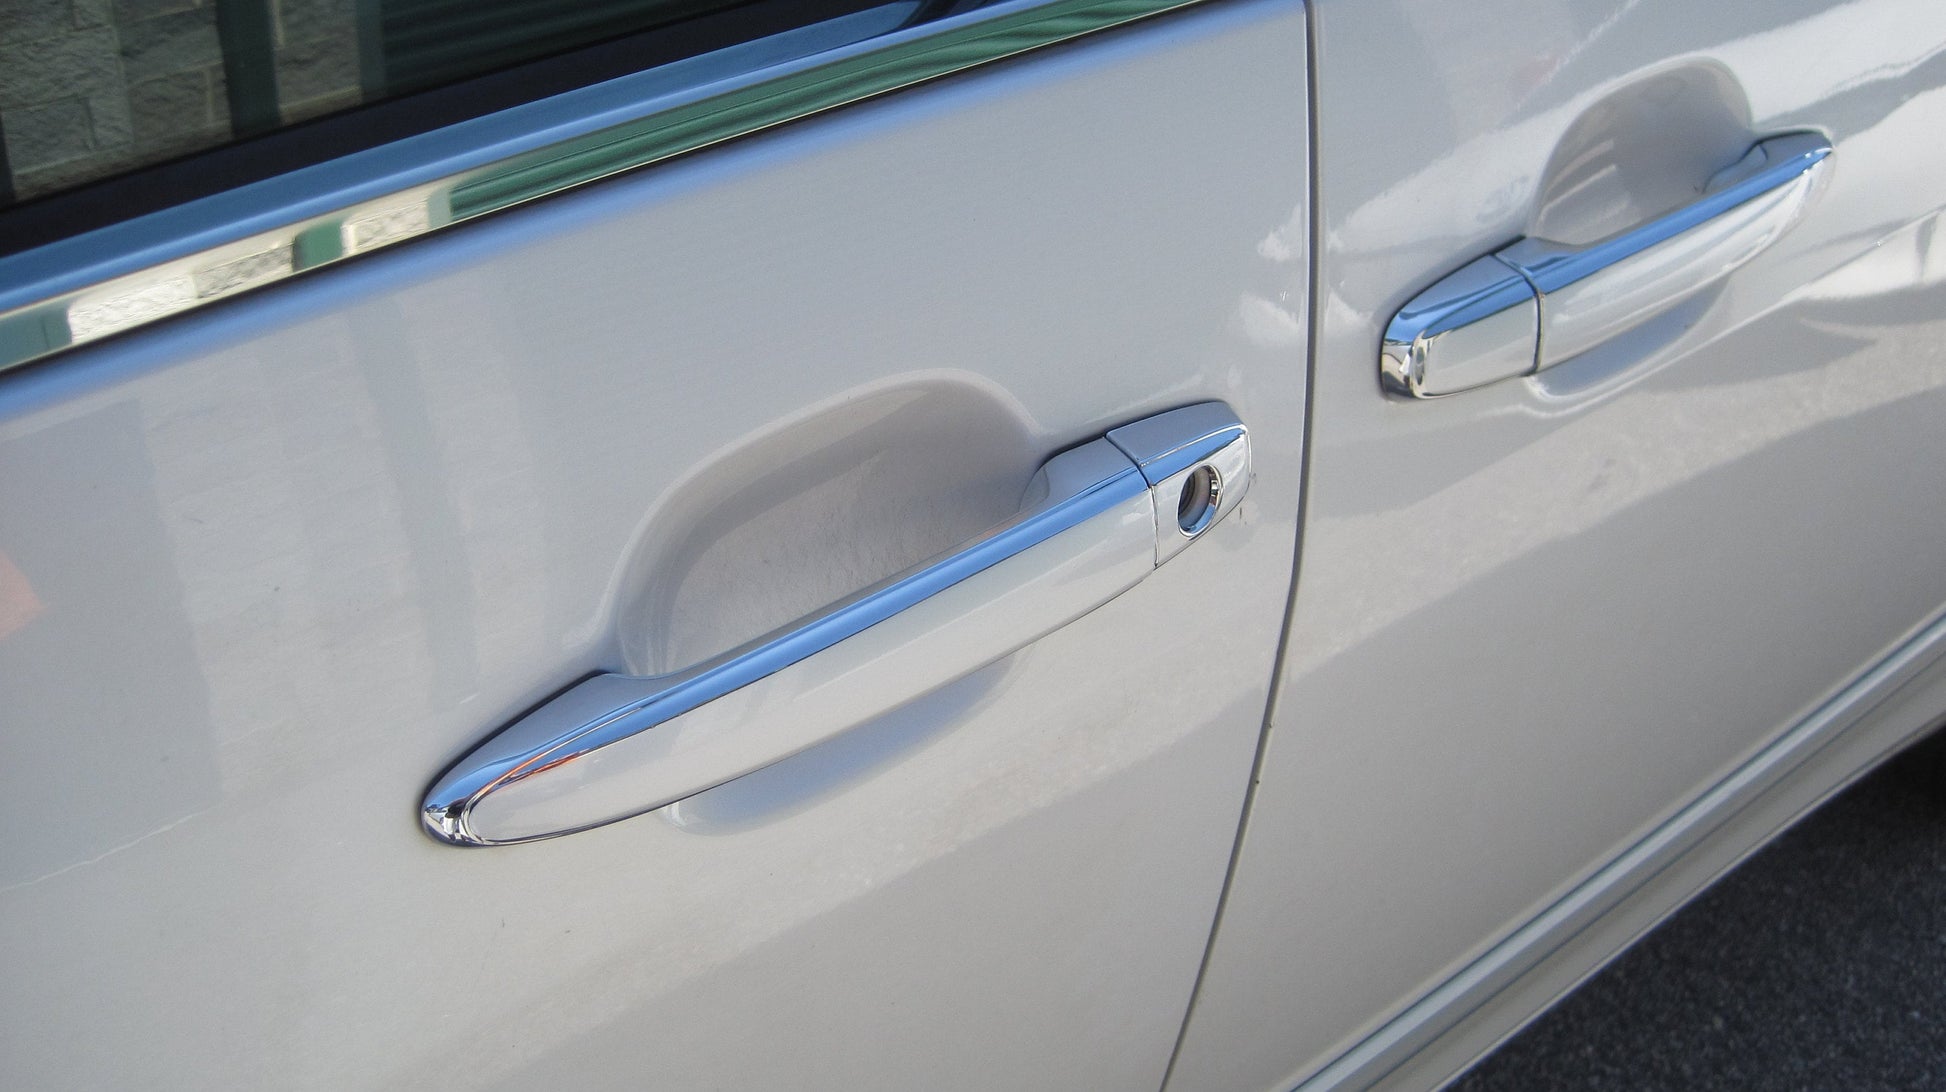 Full Set of Custom Black OR Chrome Door Handle Overlays / Covers For 2003 - 2009 Lexus GX470 - You Choose the Color of the Middle Insert